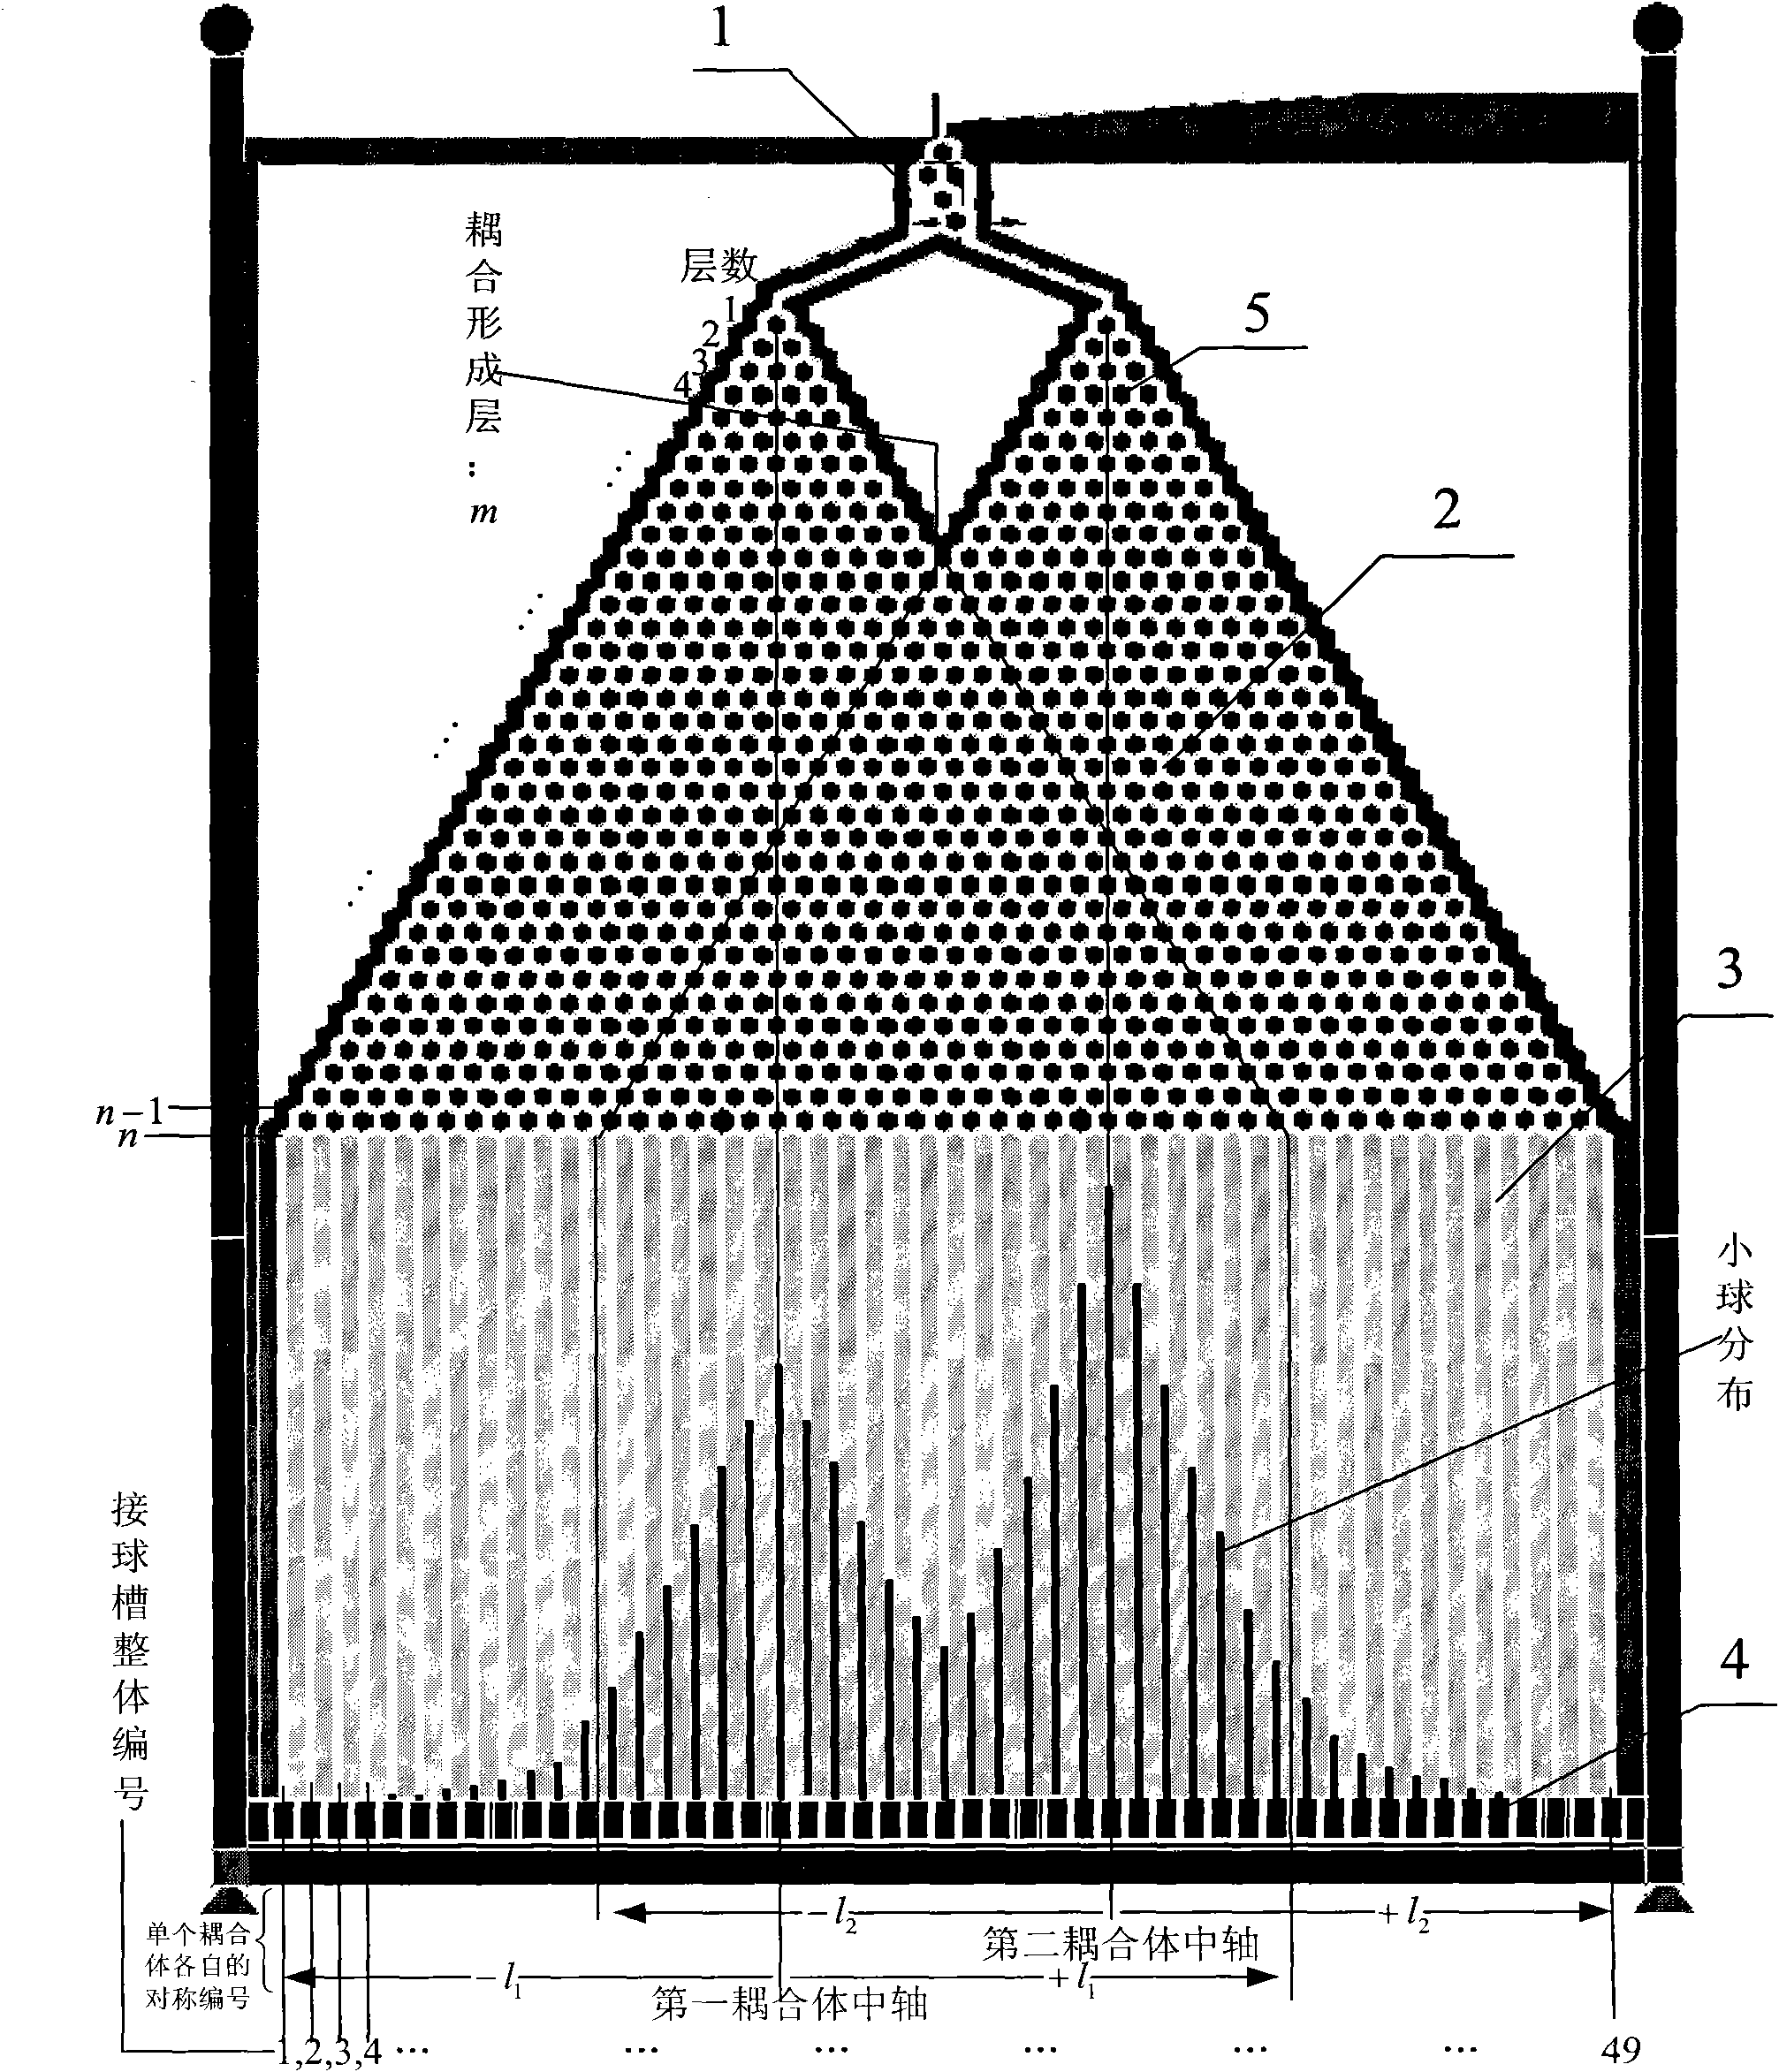 Coupled normal distribution probability demonstration instrument